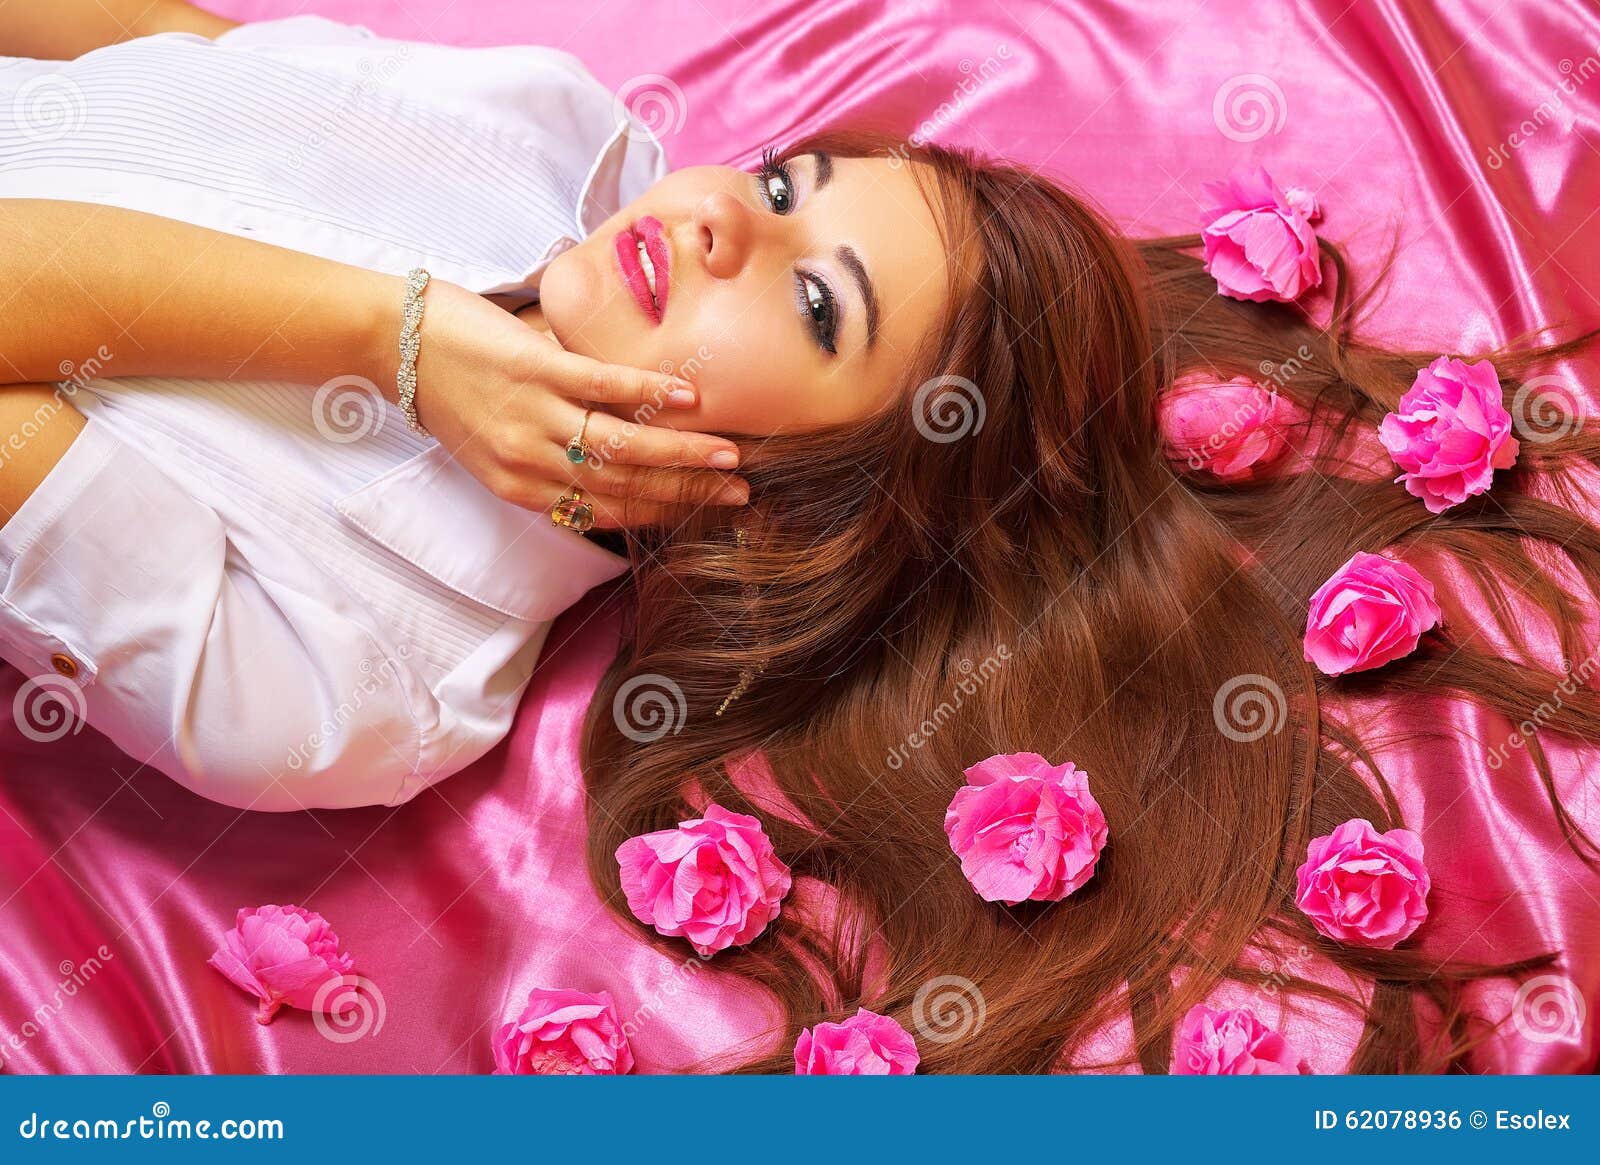 Beautiful Girl Lying On The Floor And Smiling, With Tulip 